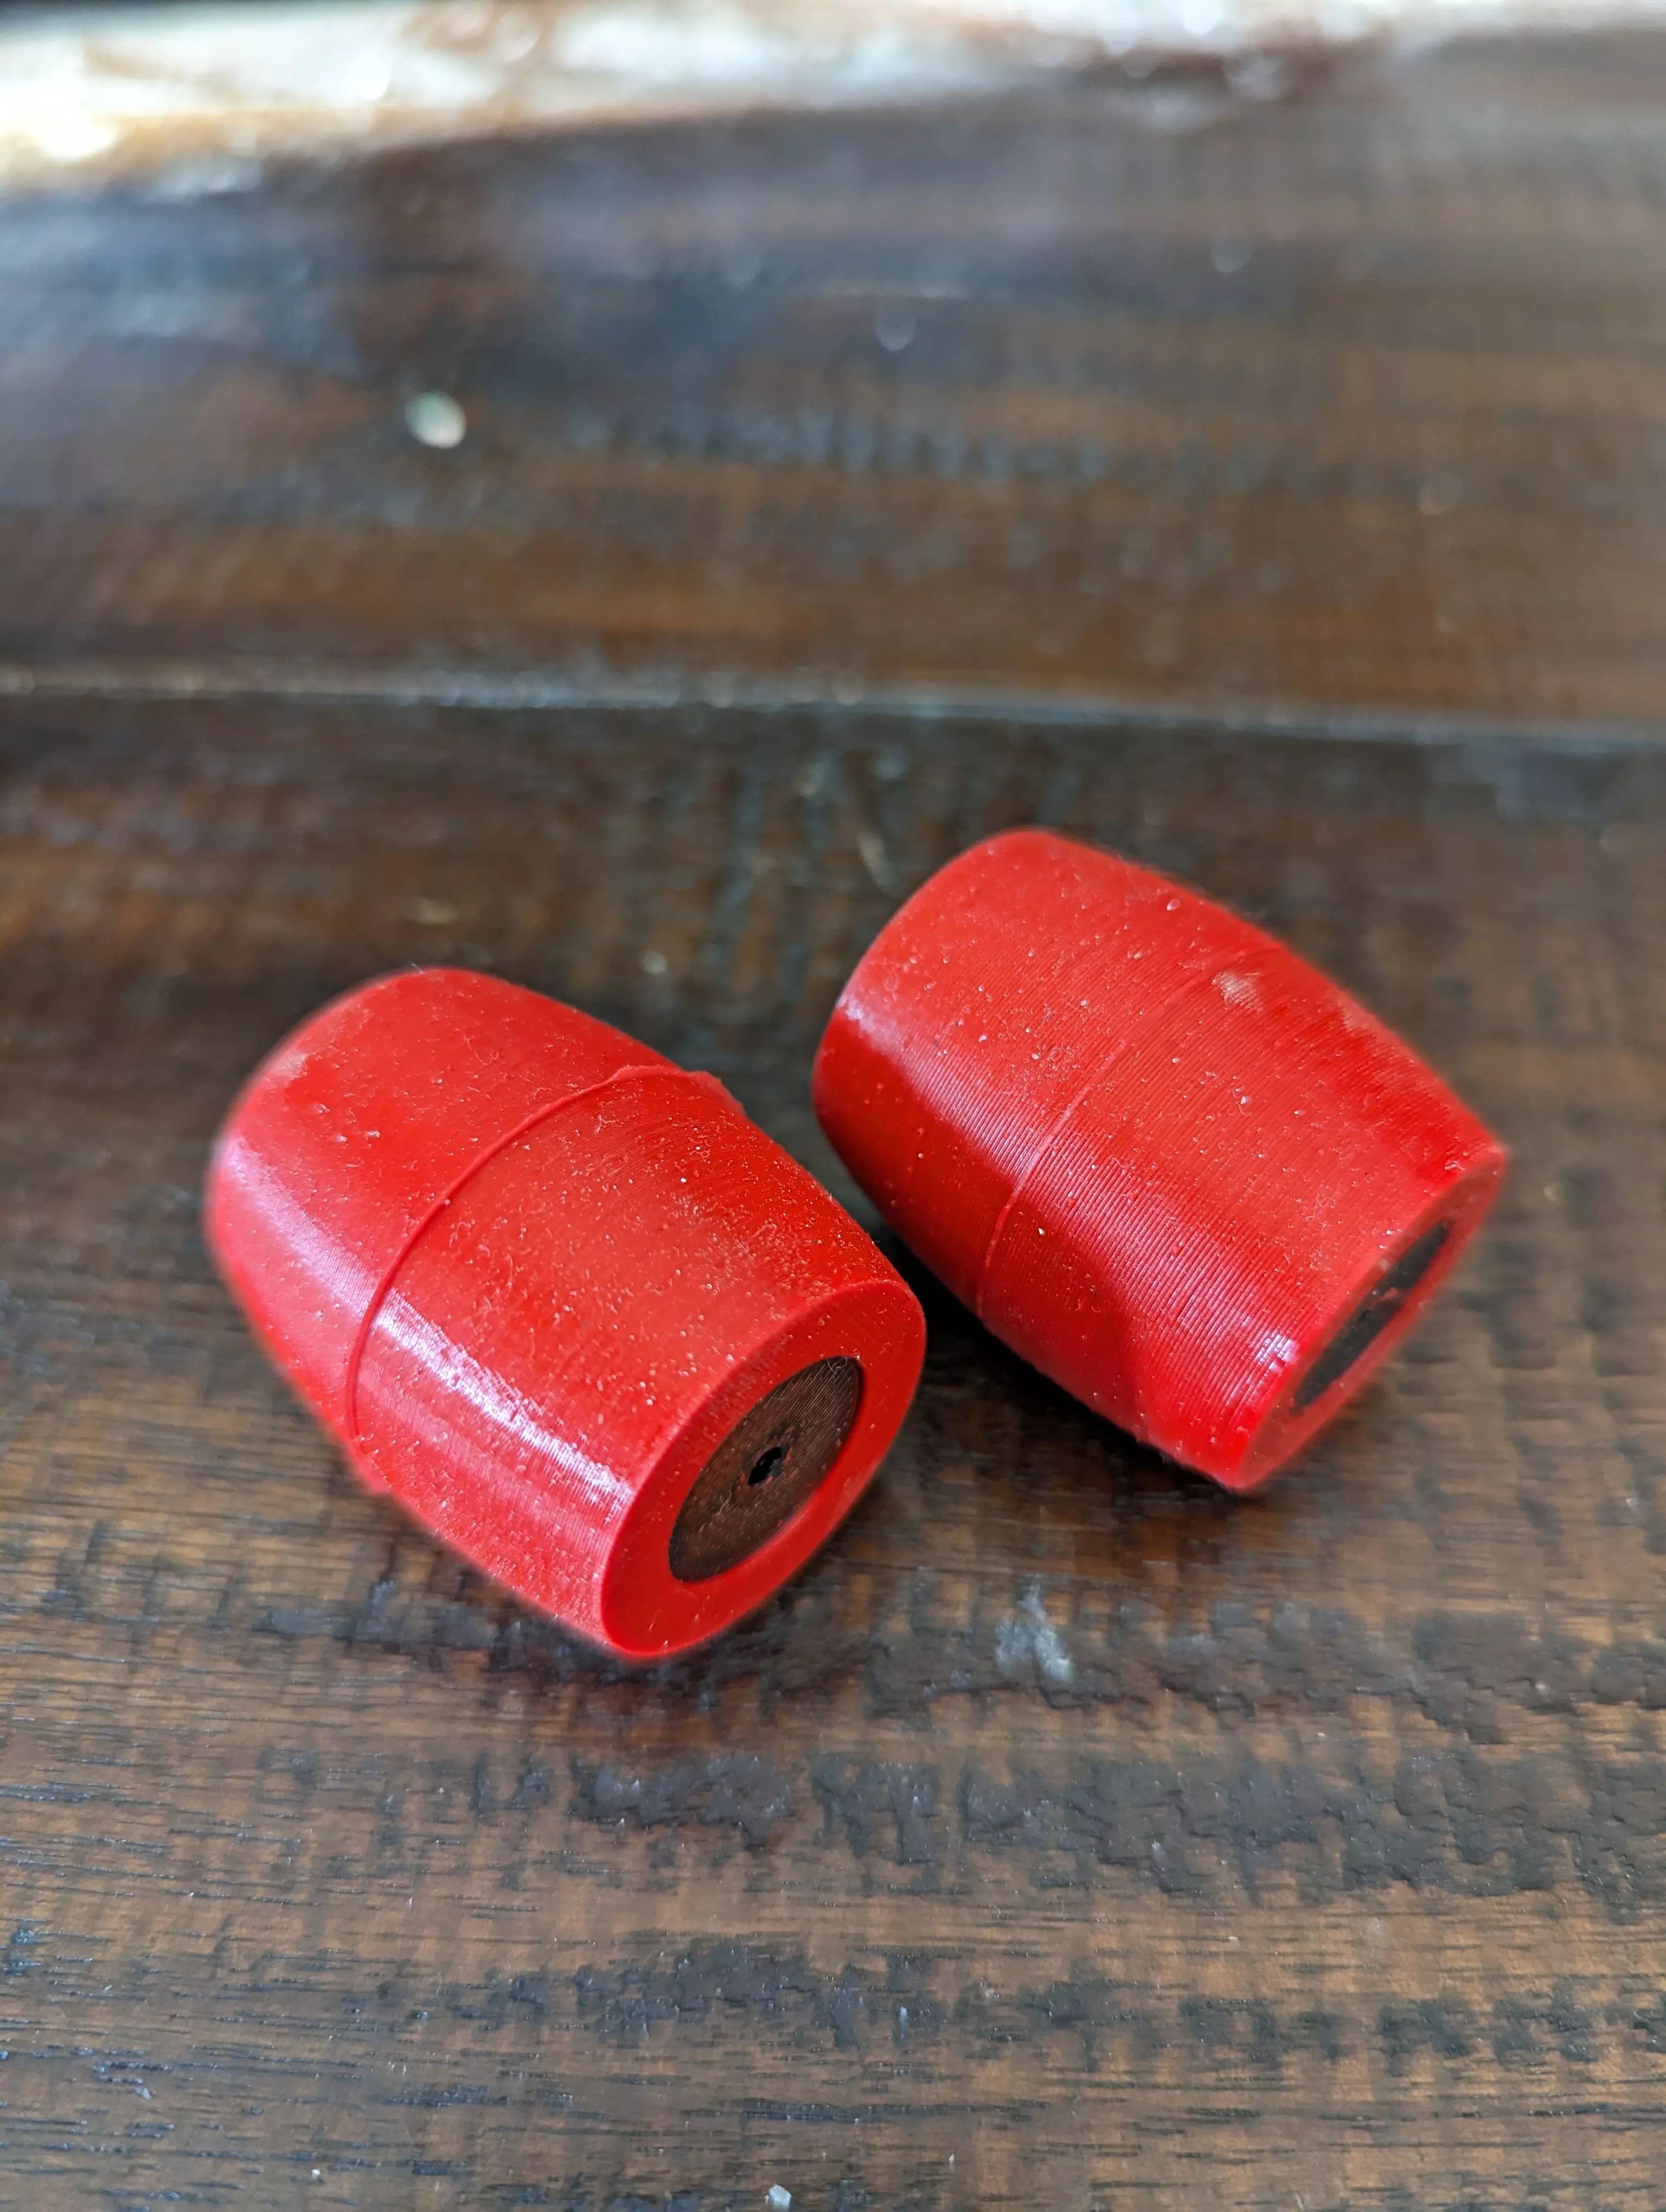 A pair of overmolded rollers placed horizontally